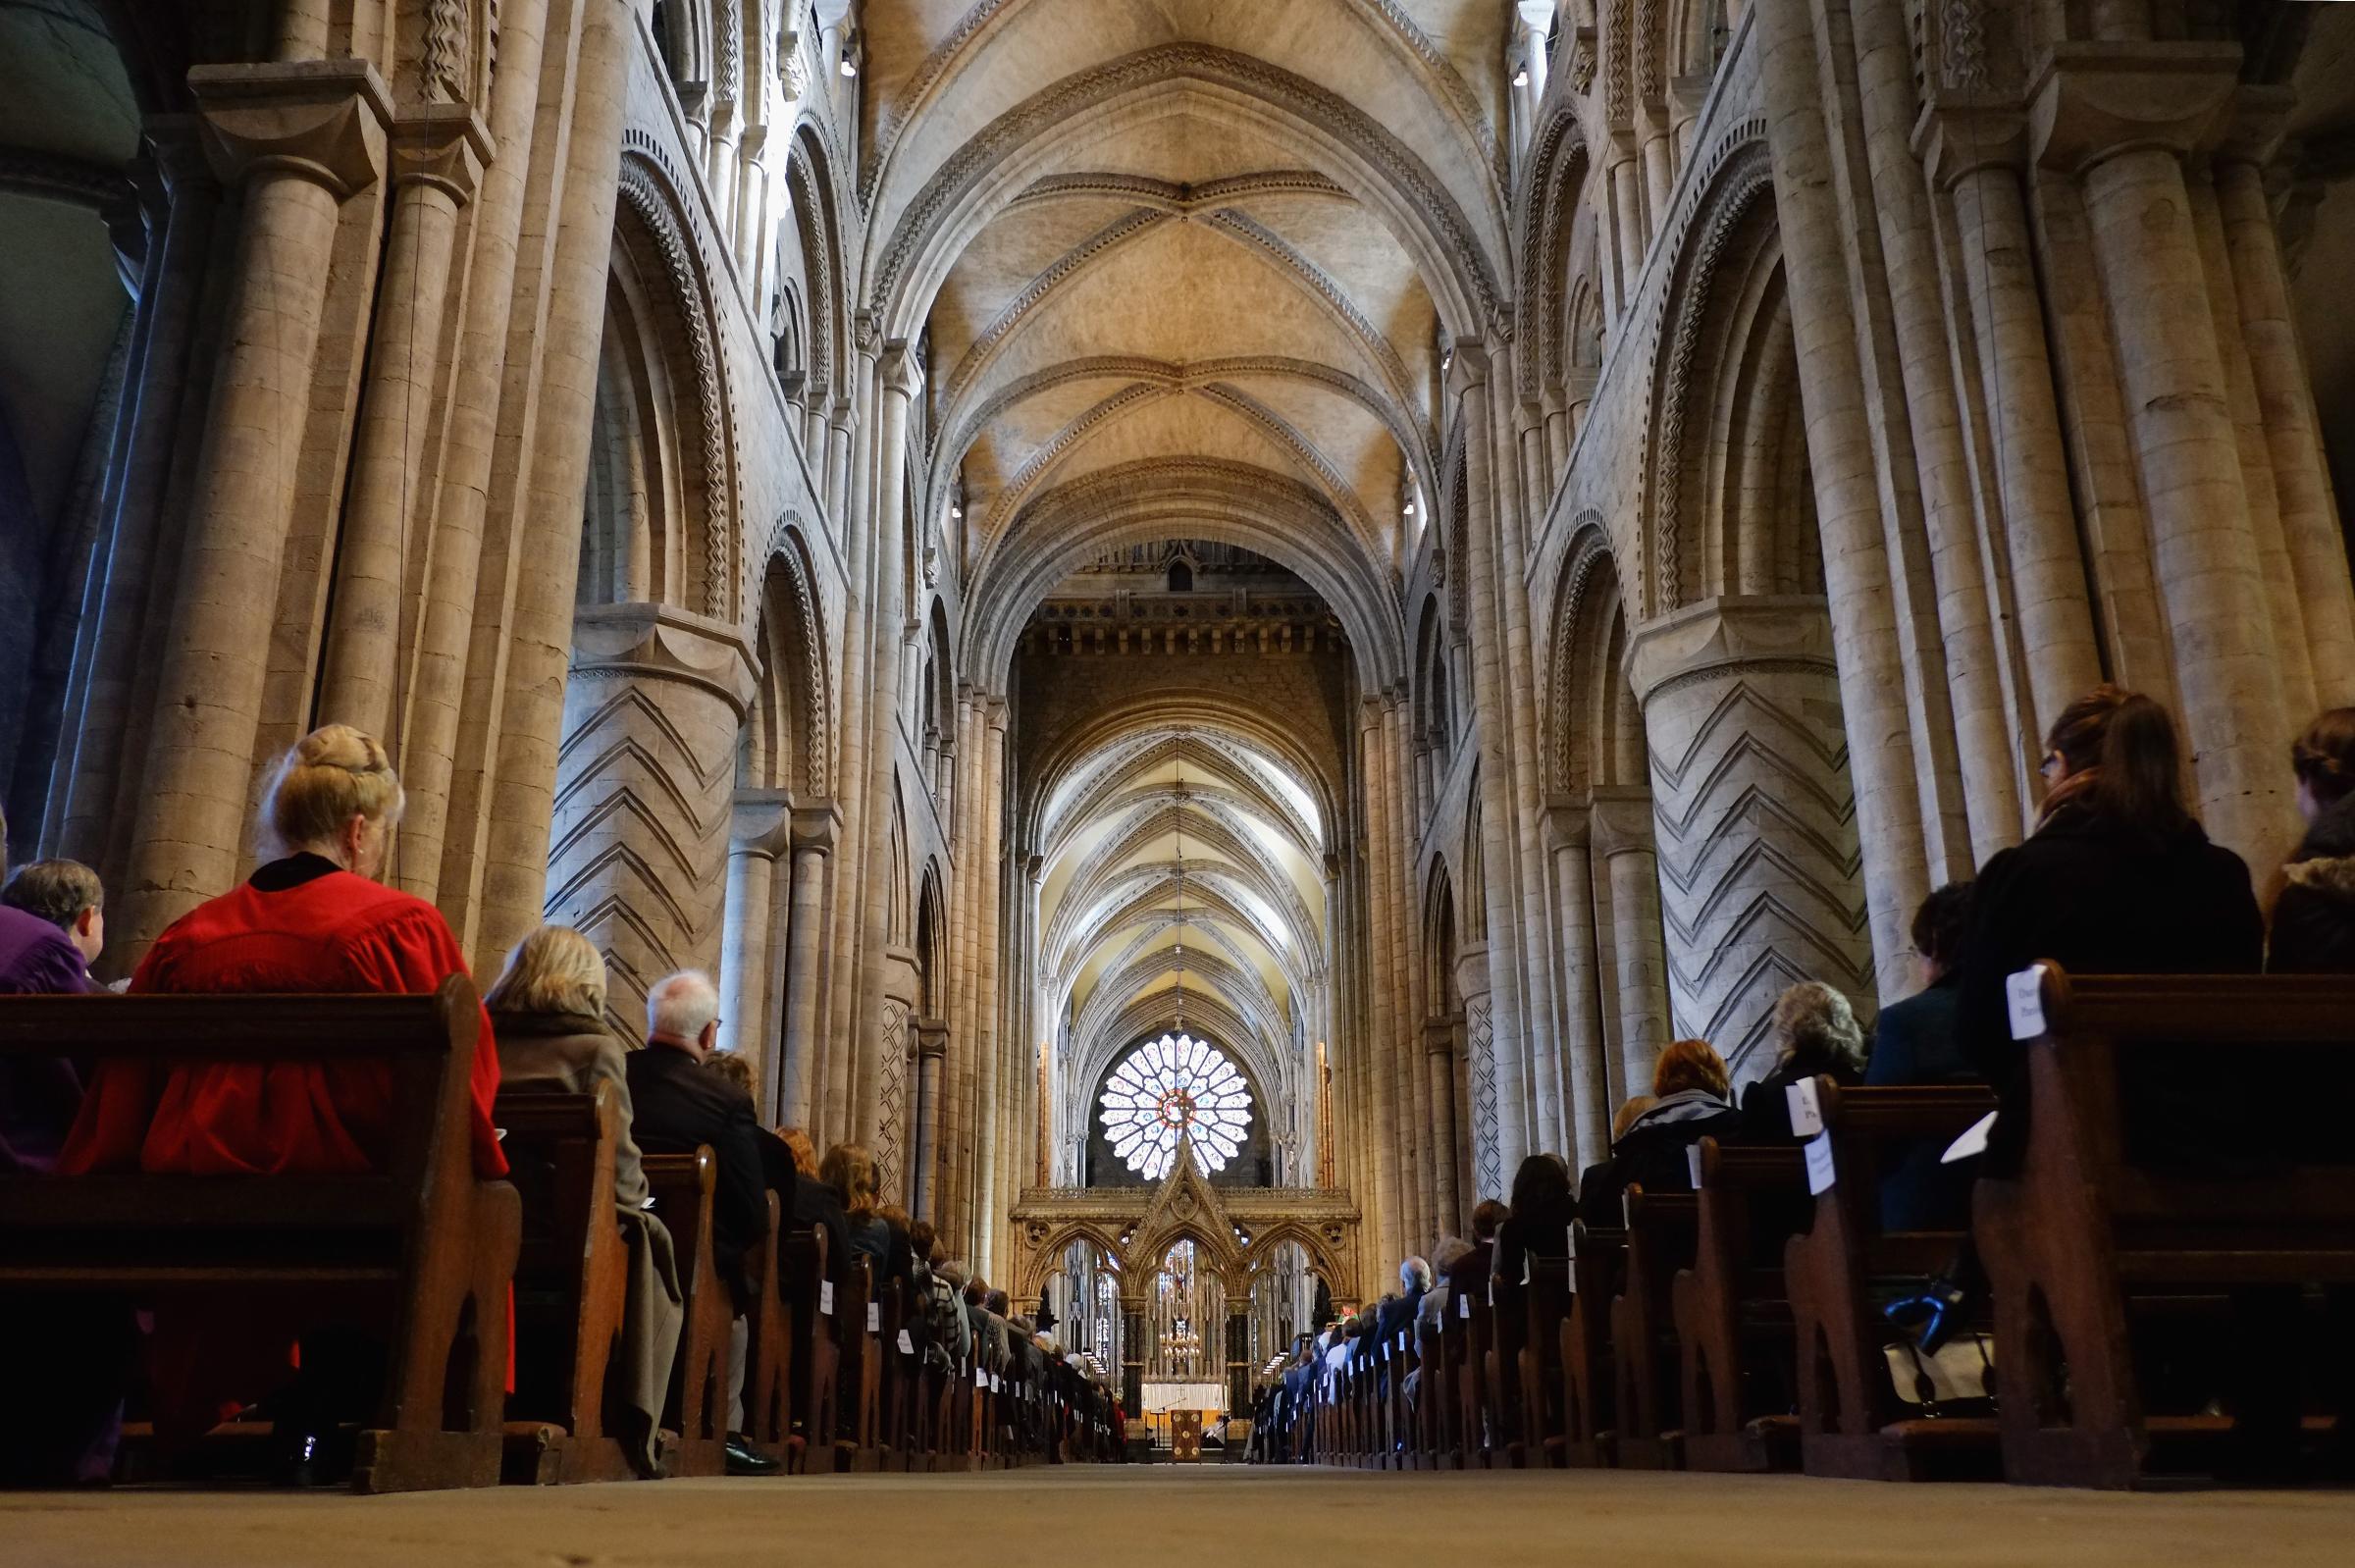 Durham Cathedral in Durham, England. Remember that snowy courtyard Harry walked through with his pet owl, Hedwig, in 'Harry Potter and the Sorcerer's Stone'? You can take your own stroll through the same spot during a visit to the Durham Cathedral.